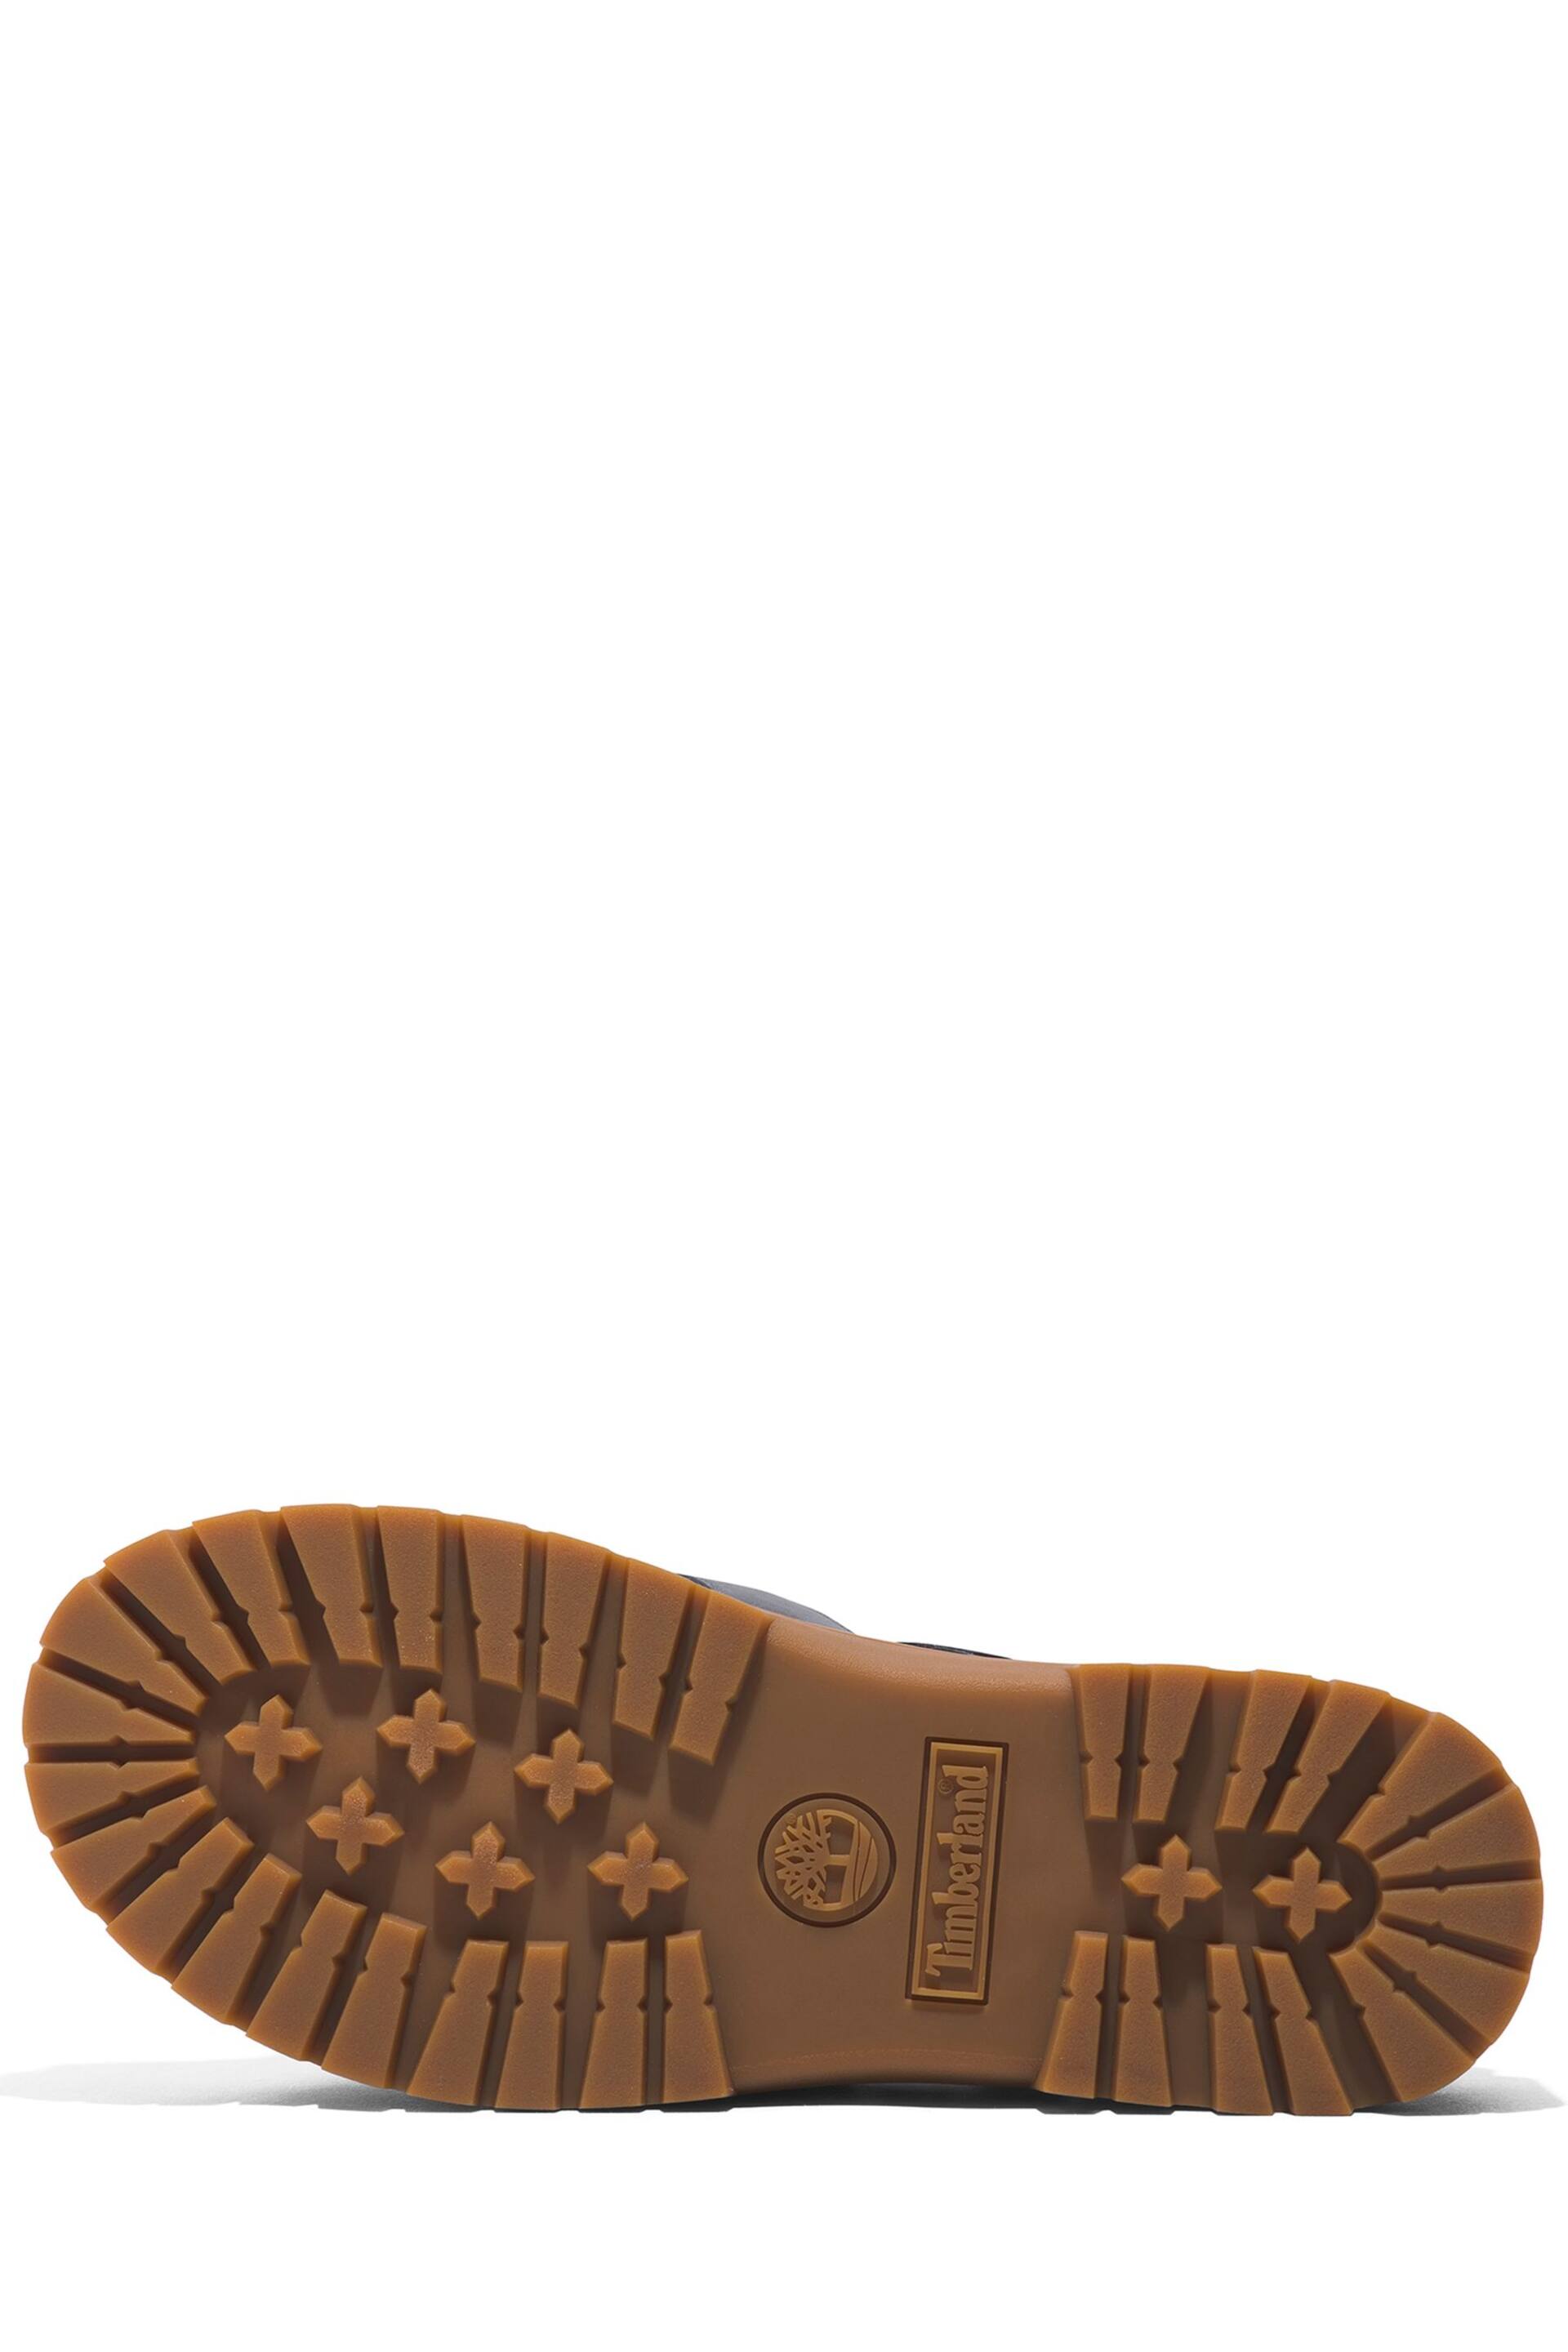 Timberland Blue Clairemont Way Fishernan Sandals - Image 8 of 8